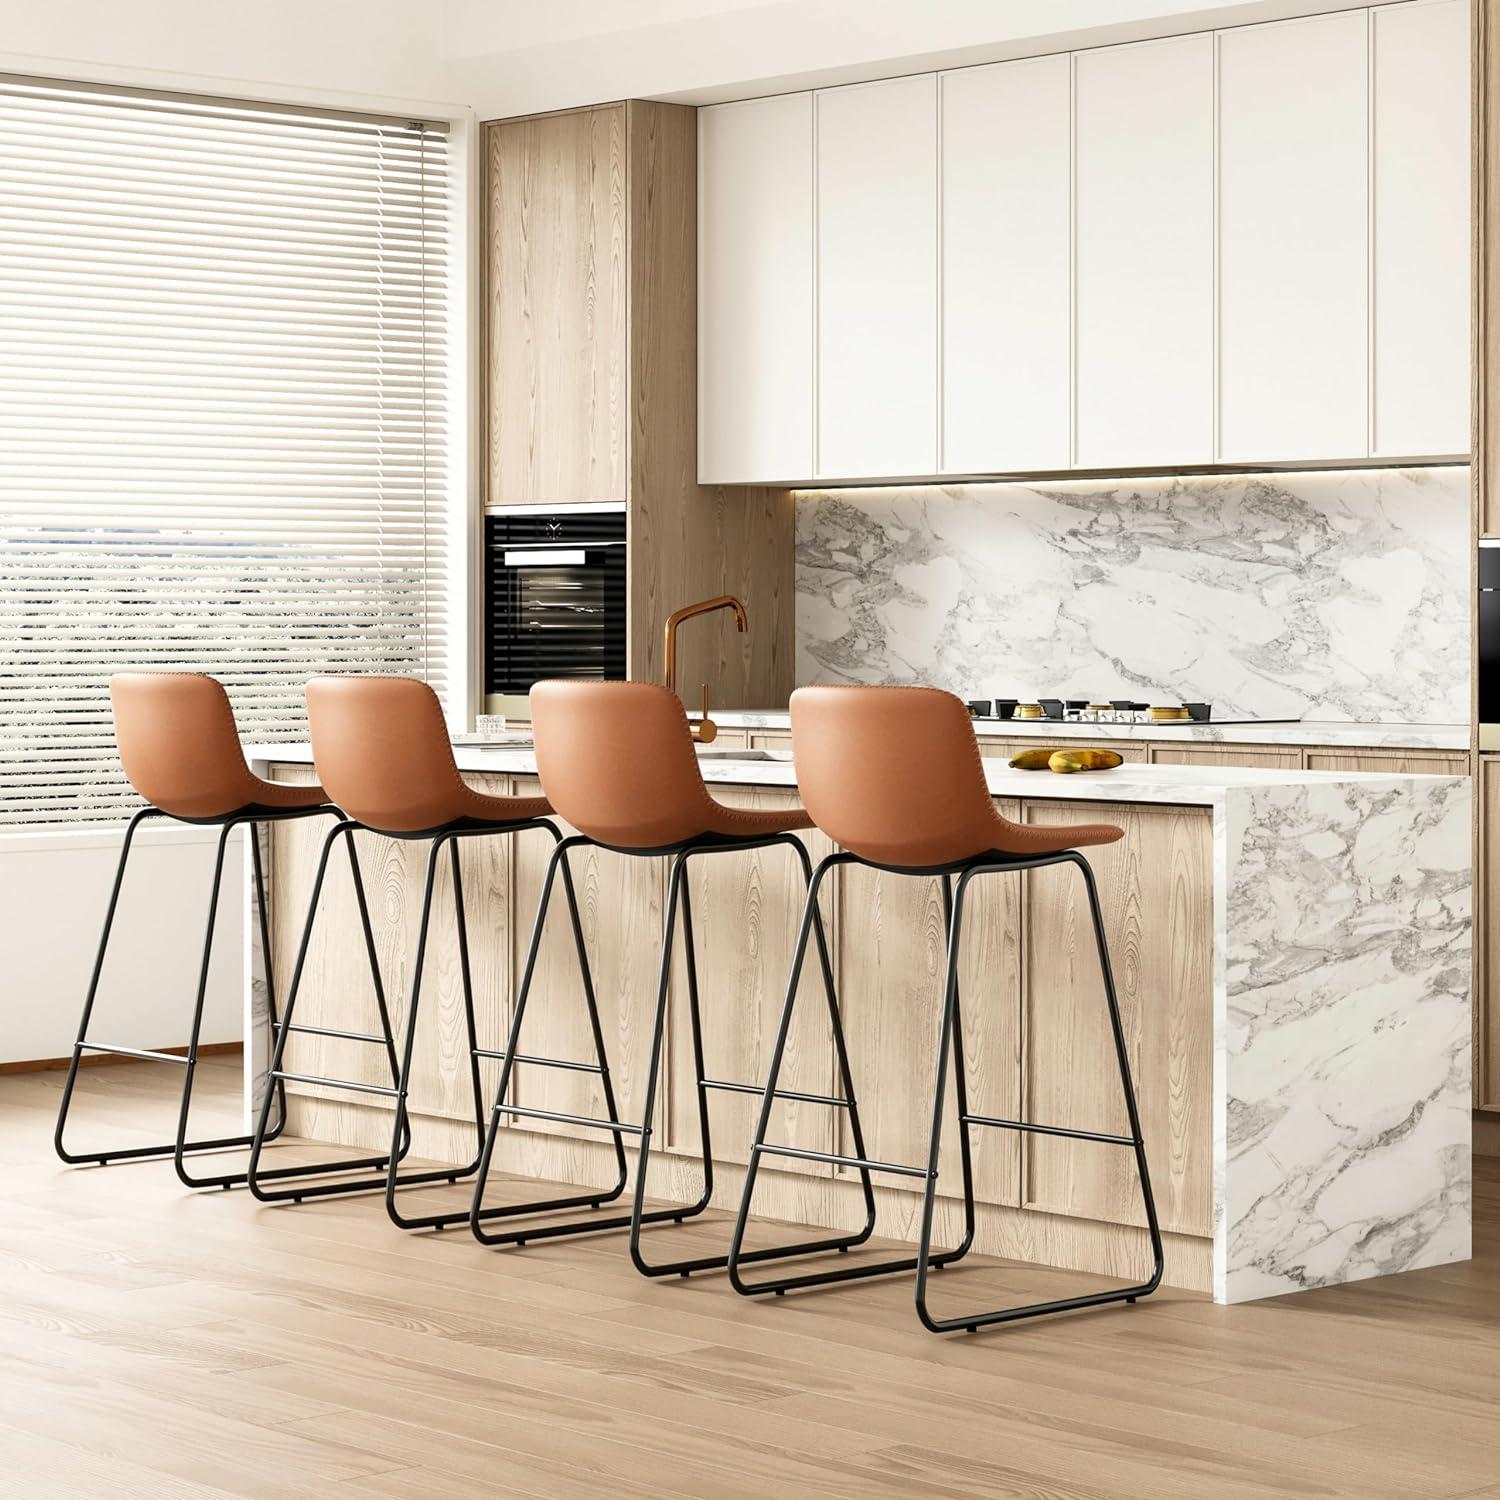 Modern Industrial Counter Height Bar Stools Set for $99.90 Shipped